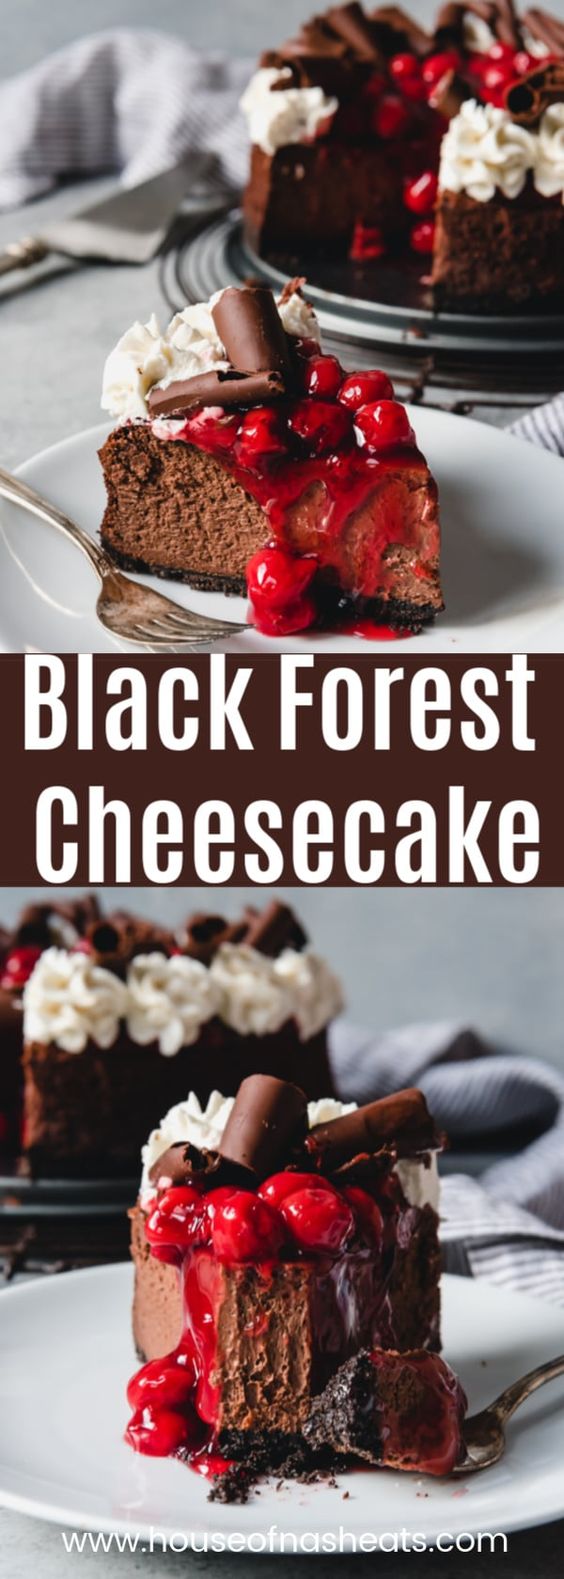 Be still my cherry chocolate loving heart!  This Black Forest Cheesecake is a decadently creamy, dark chocolate cheesecake topped with cherry pie filling, sweetened whipped cream, and chocolate curls.  #ad #cheesecake #blackforest #chocolate #cherries #easy #recipe #christmas #valentinesday #best #dark #dessert #holiday #cherrypiefillings